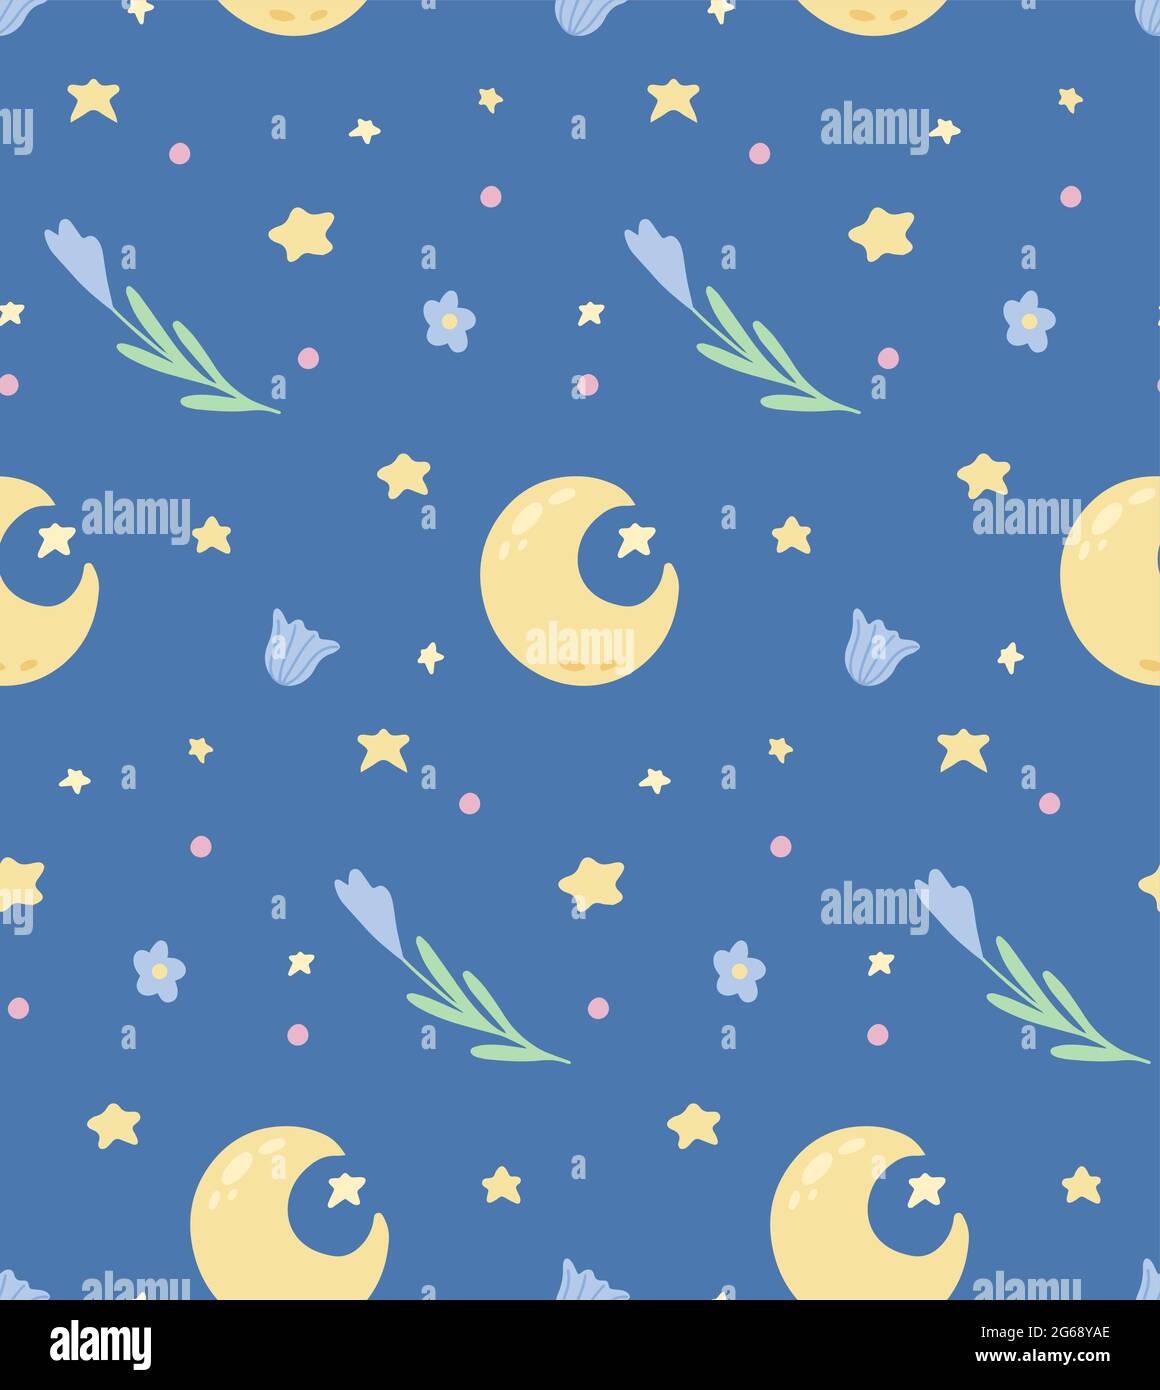 Cute childish pattern with star, crescent and flowers on blue background. Vector texture with moon and floral pattern. Cartoon summer night wallpaper Stock Vector